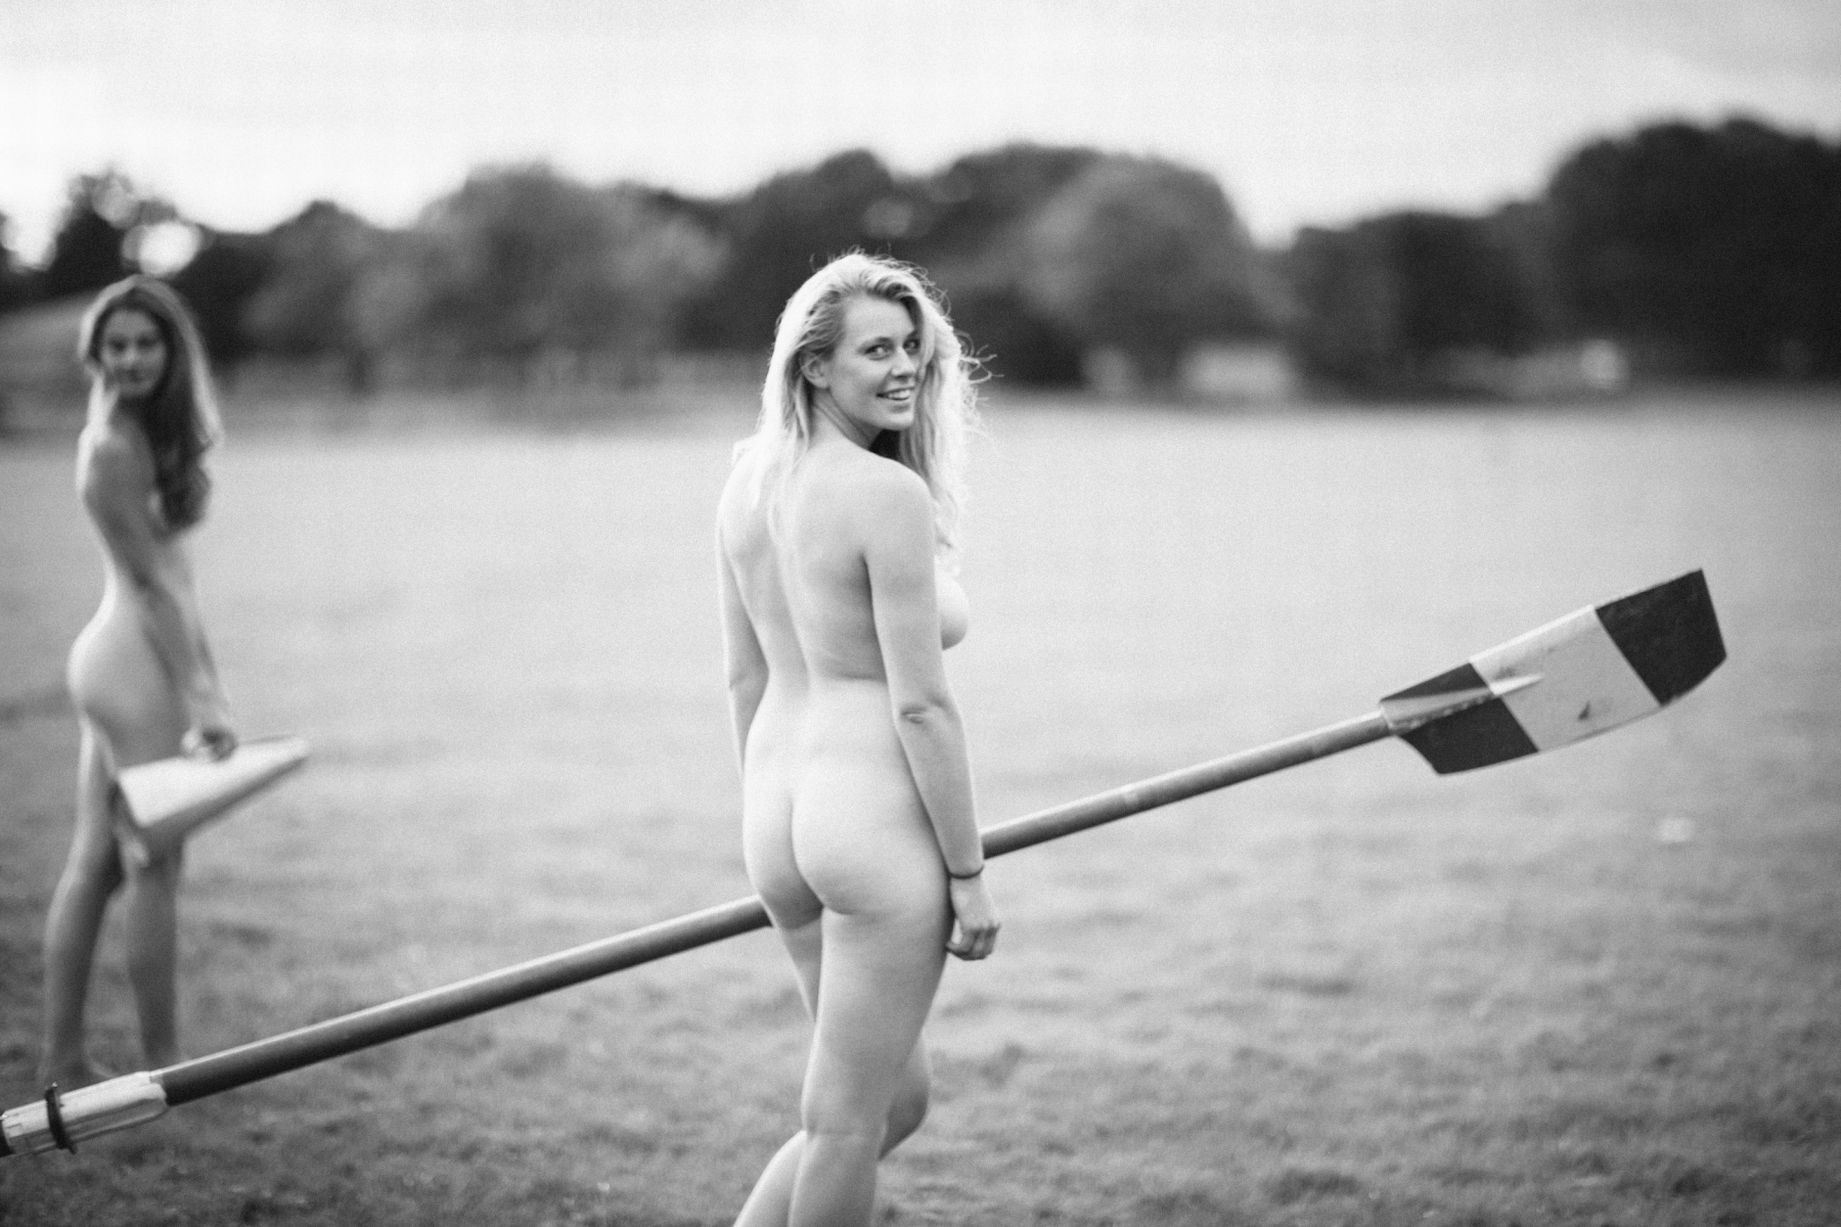 When the warwick rowing teams put out naked calendars, we all win